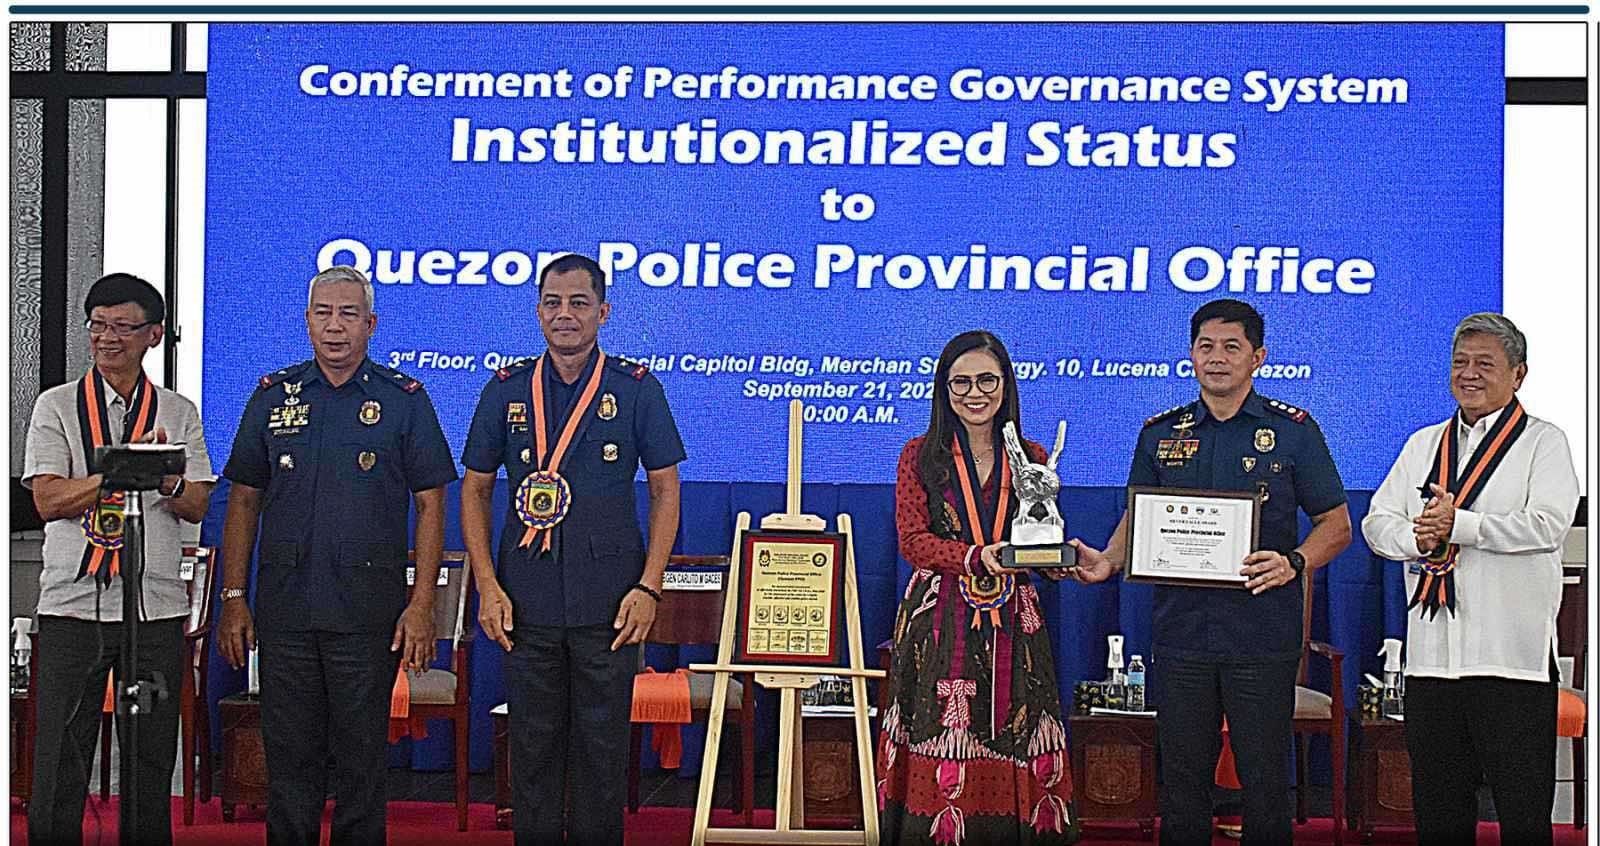 Quezon Police gets institutionalized status on performance